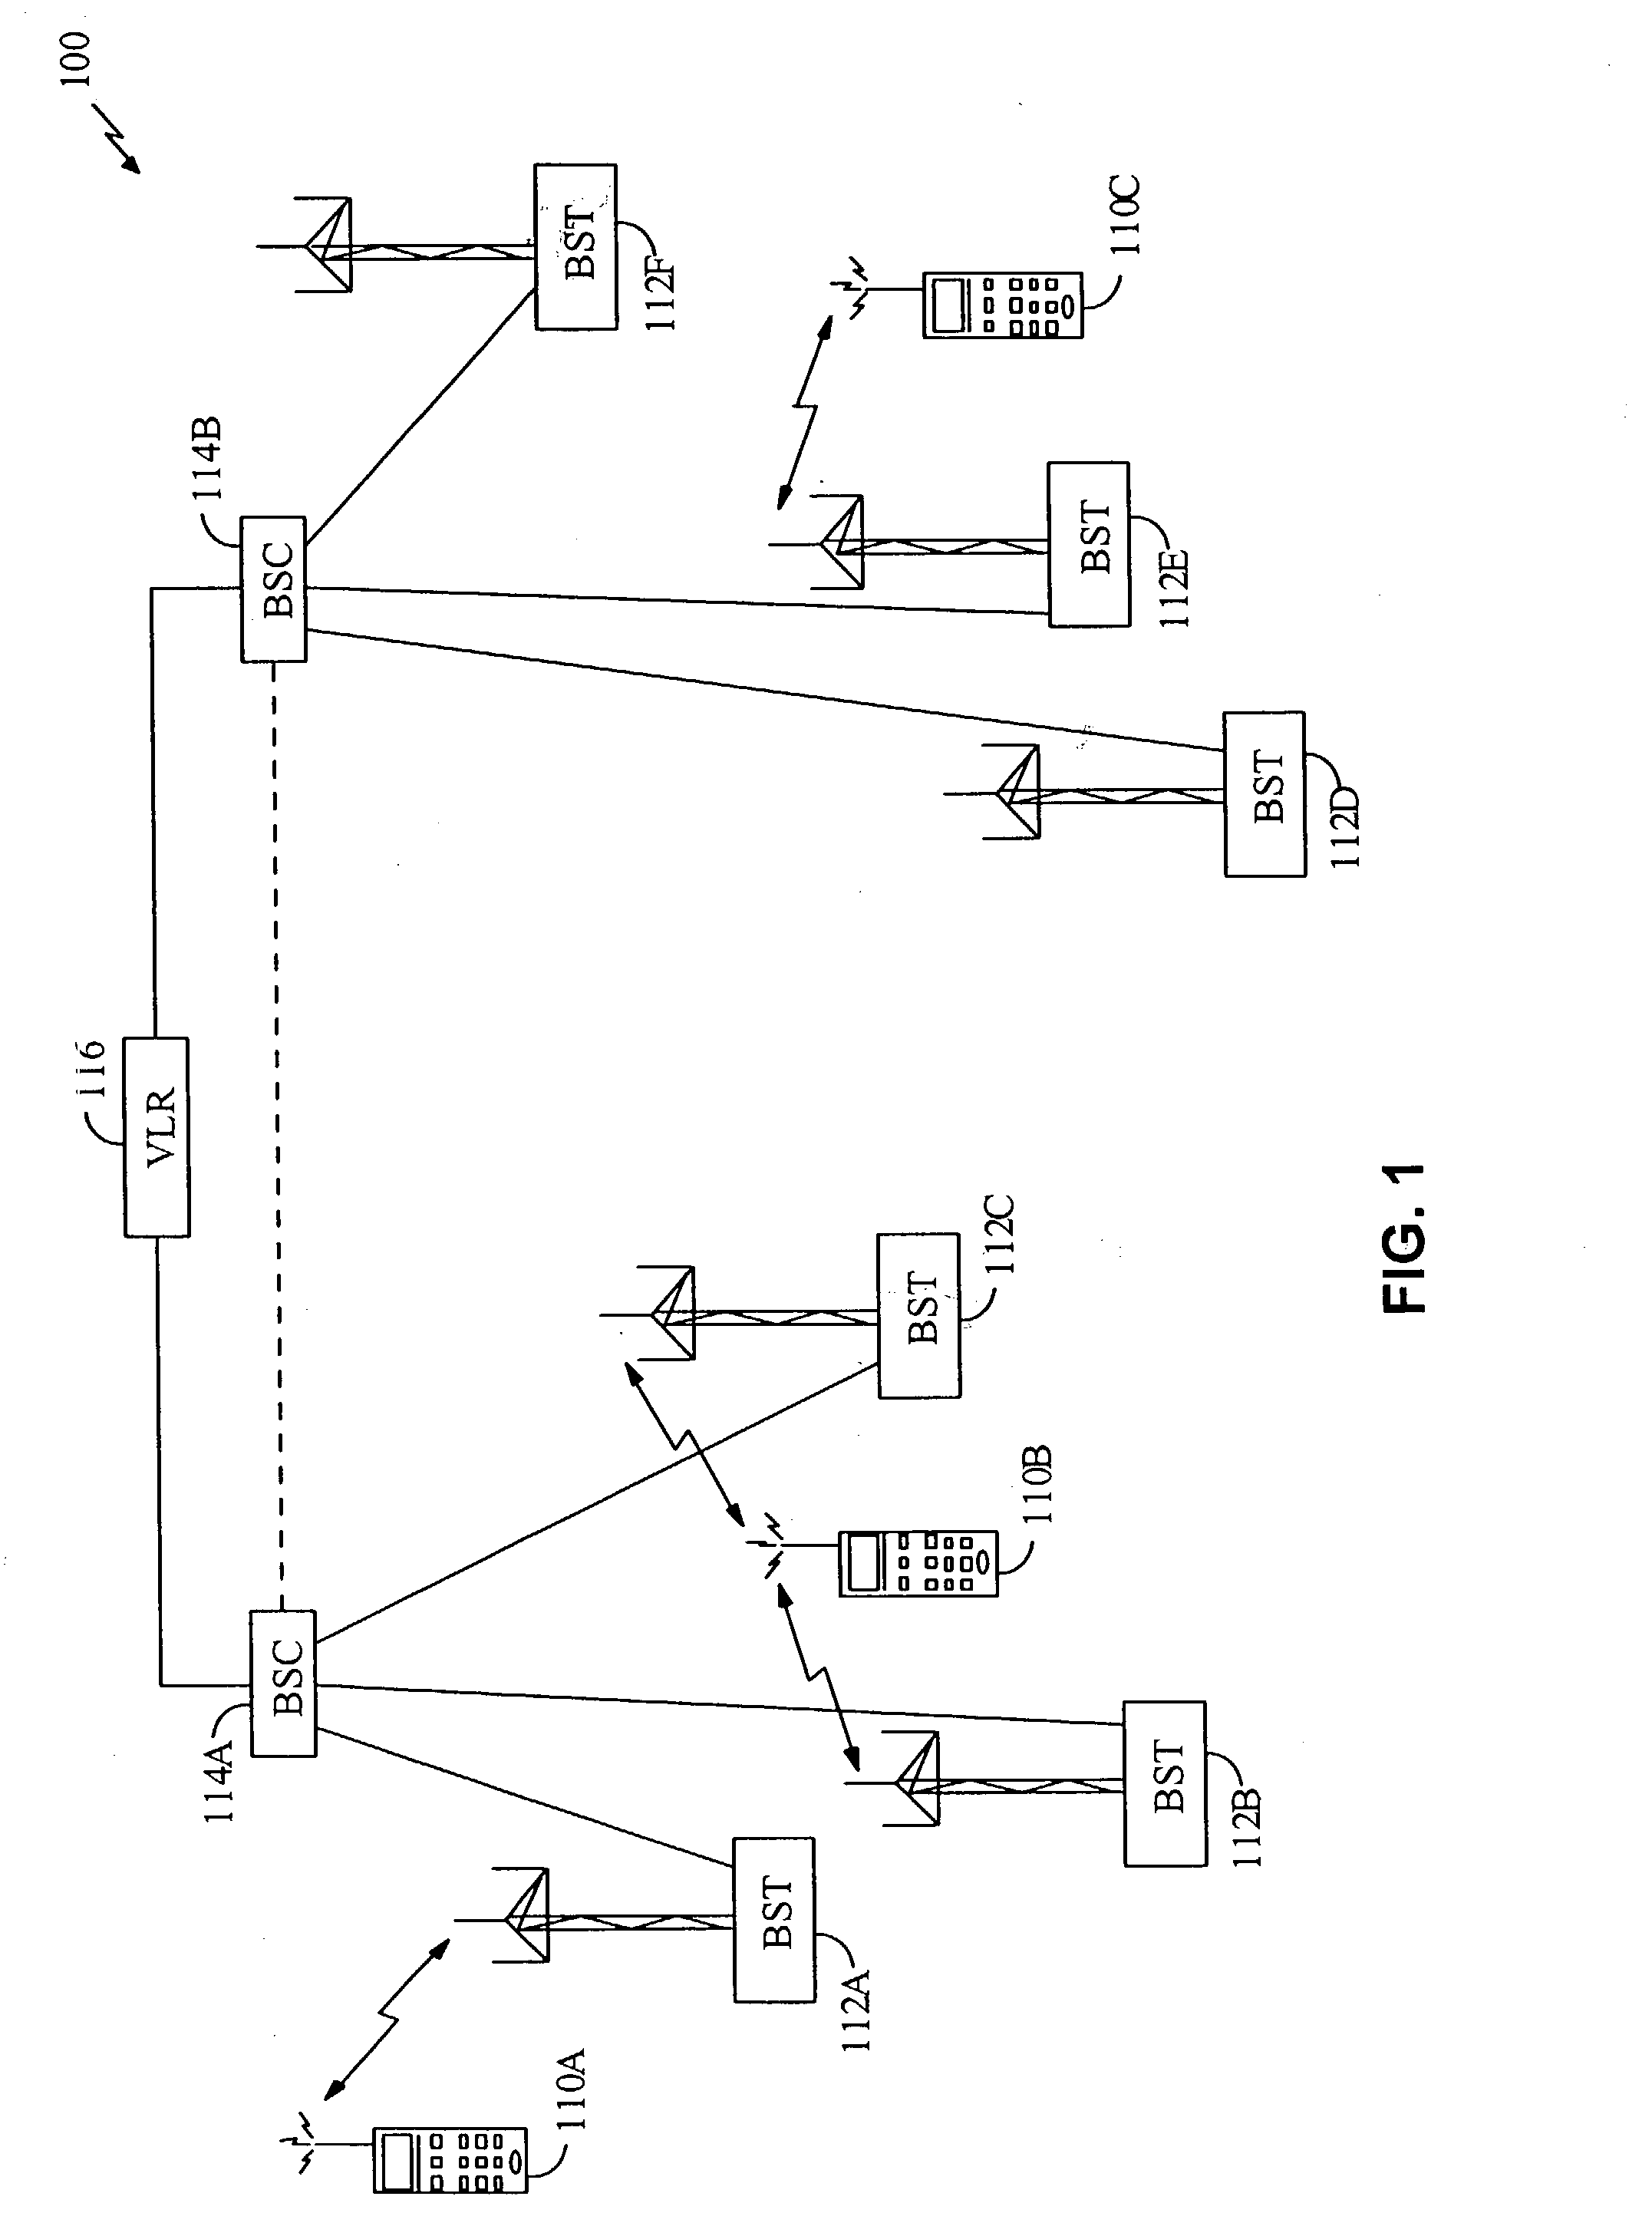 Method and apparatus for providing configurable layers and protocols in a communications system